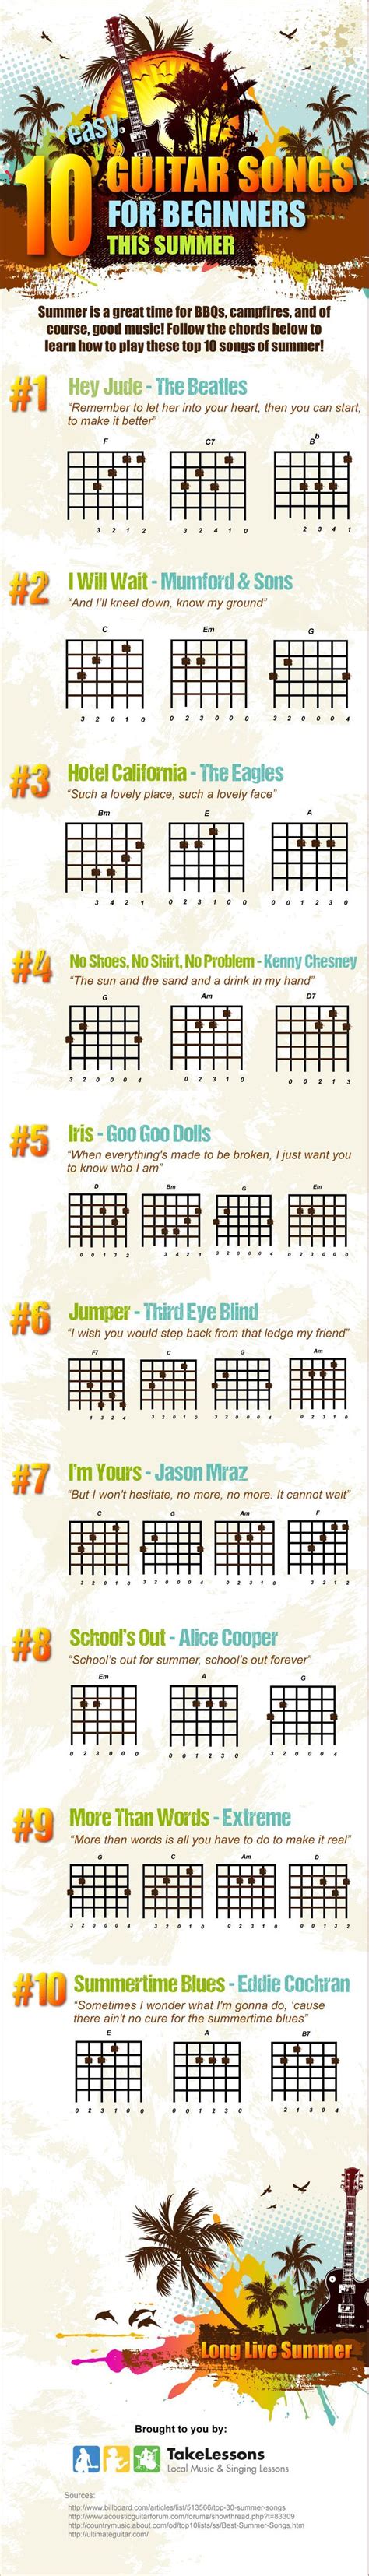 The list of easy guitar songs we've assembled below was put together primarily with the beginner guitarist in mind and it includes both acoustic guitar these 20 songs with easy guitar chords are perfect for practicing and getting the fundamentals down before moving on to more advanced pieces. 17 Best images about Reading & Music Lessons on Pinterest | Sheet music, Piano and Free sheet music